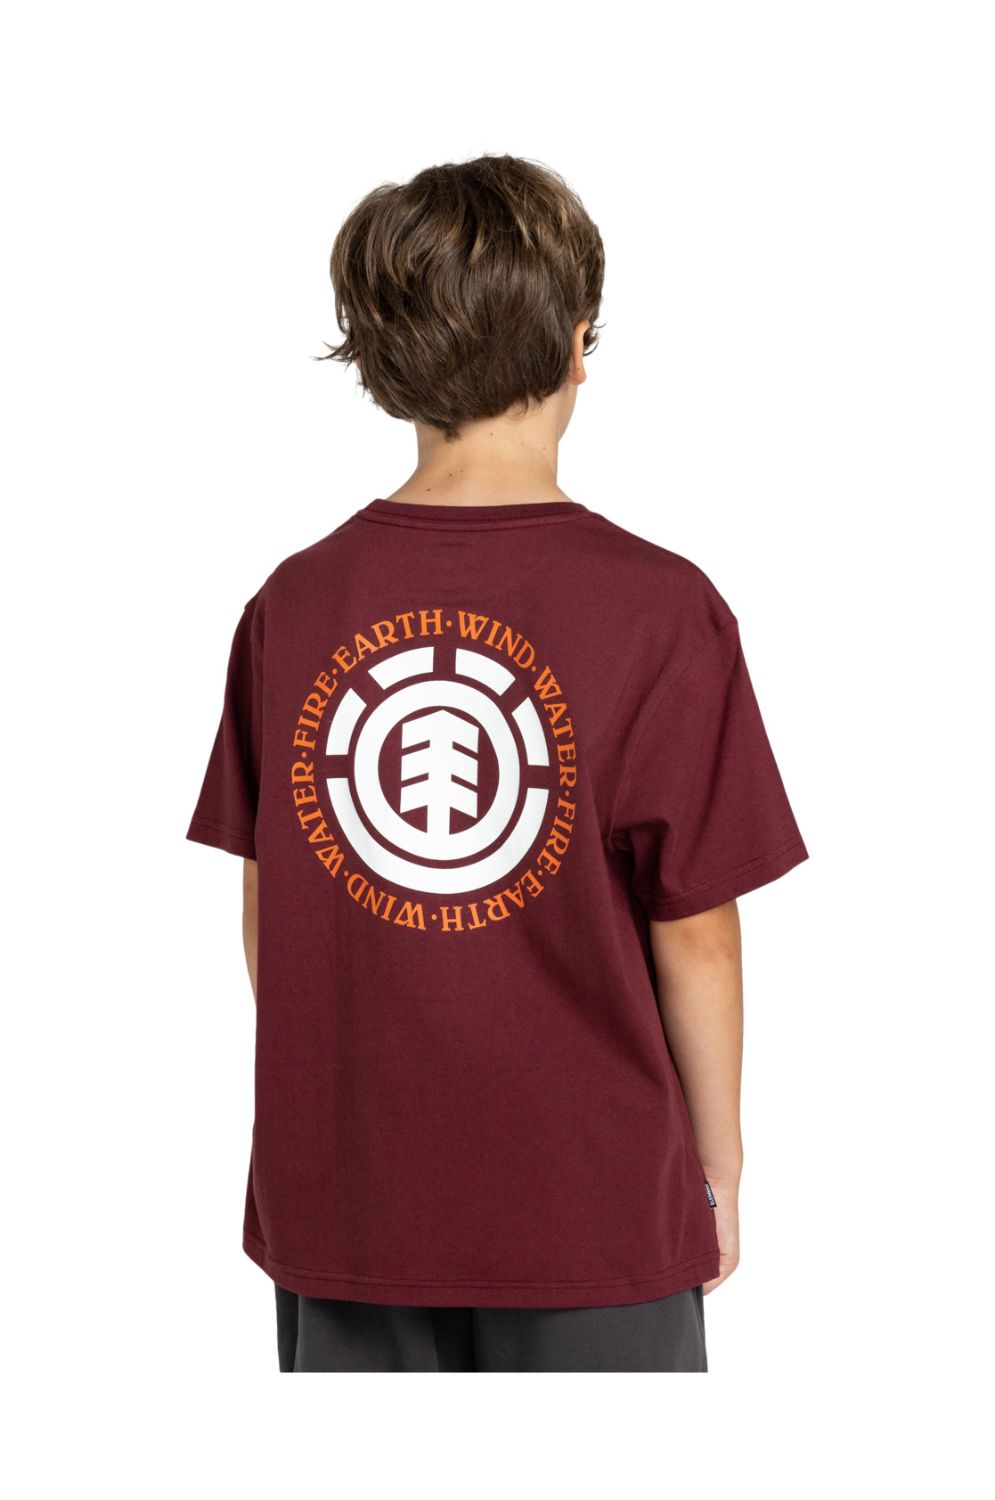 ELEMENT - SEAL TEE YOUTH - TAWNY PORT